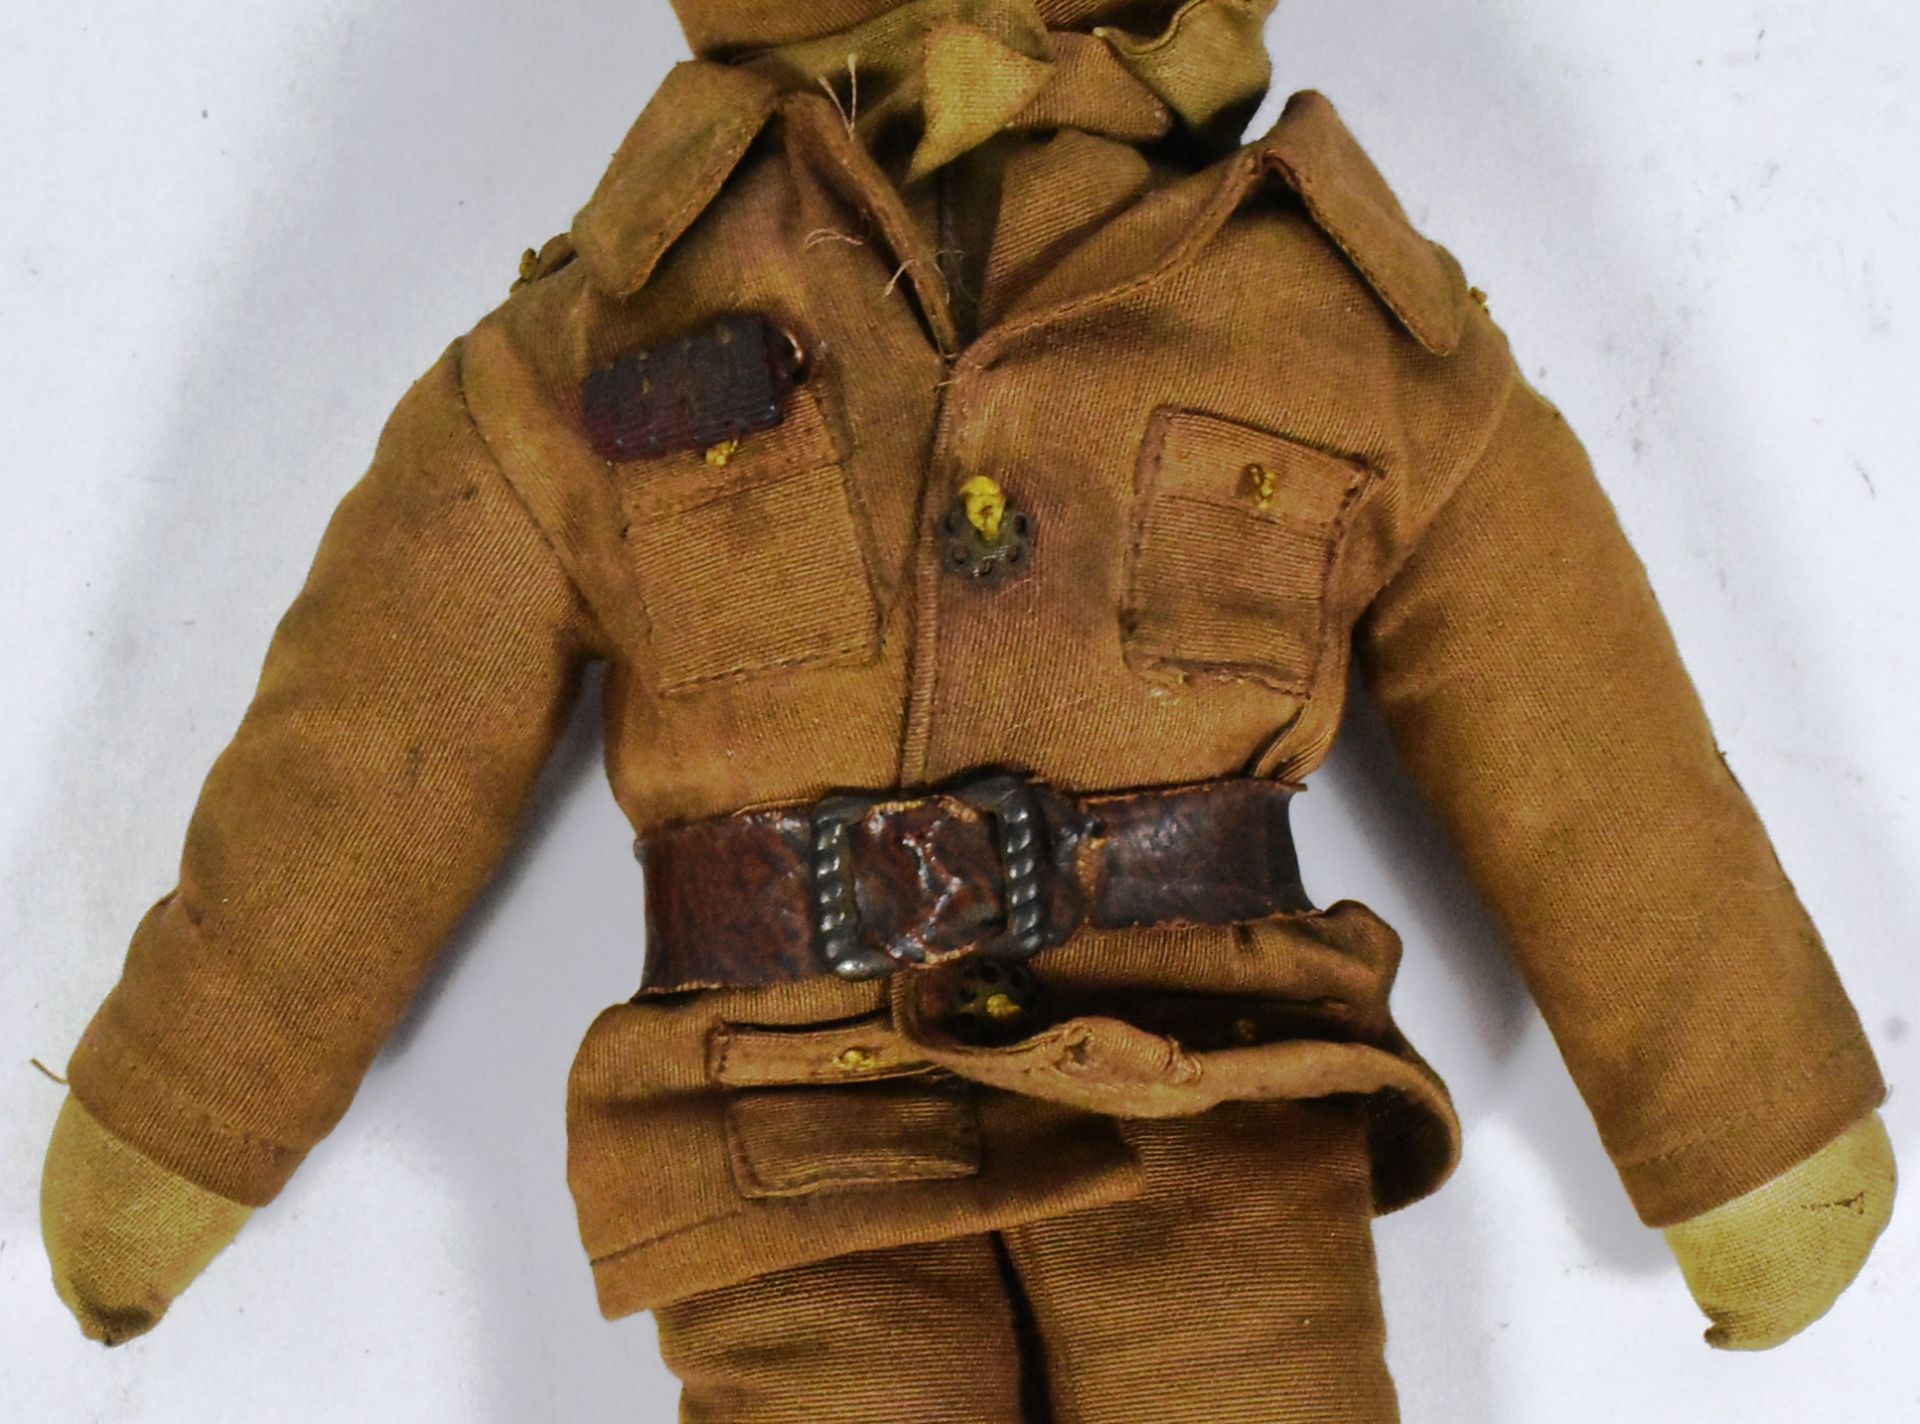 WWI FIRST WORLD WAR - EARLY RAMC MEDICAL CORPS RAG DOLL - Image 3 of 5